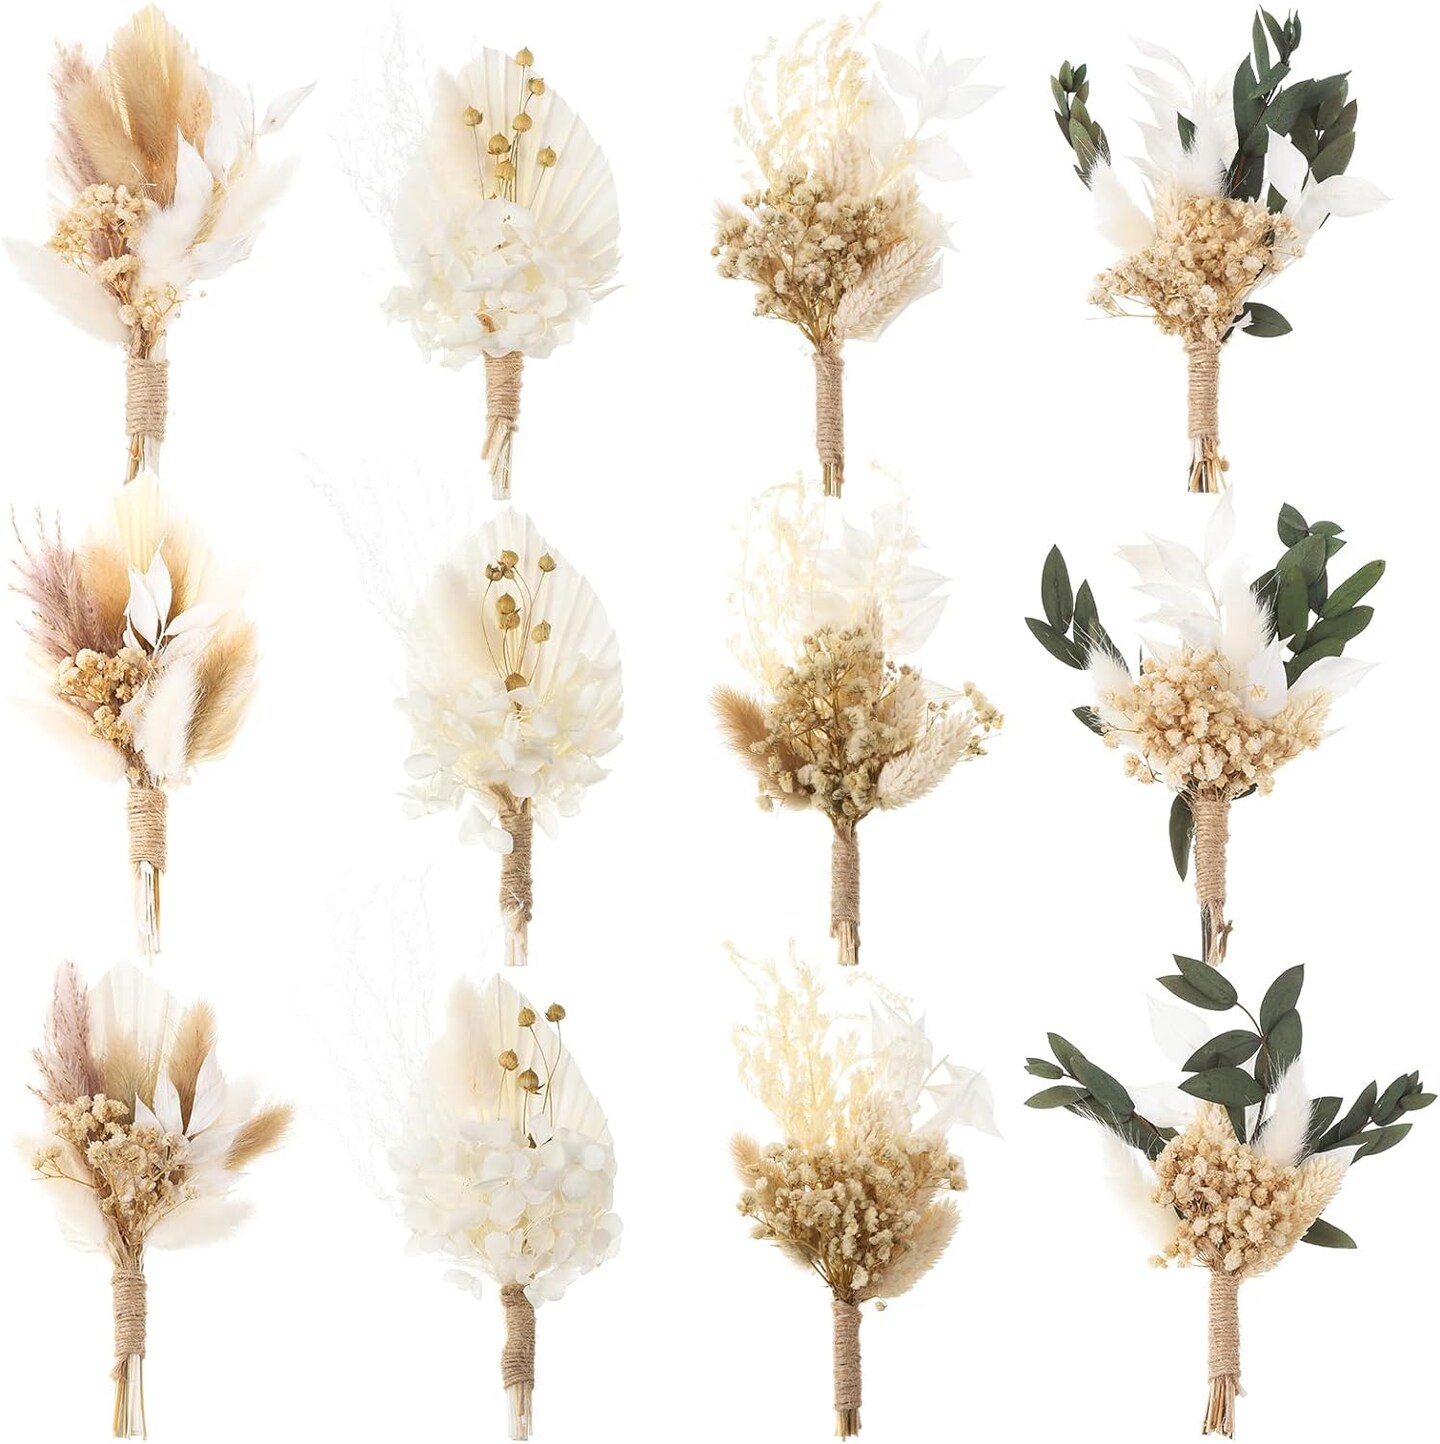 12 Mini Boho Dried Flower Bouquets for Wedding Decor and Crafts